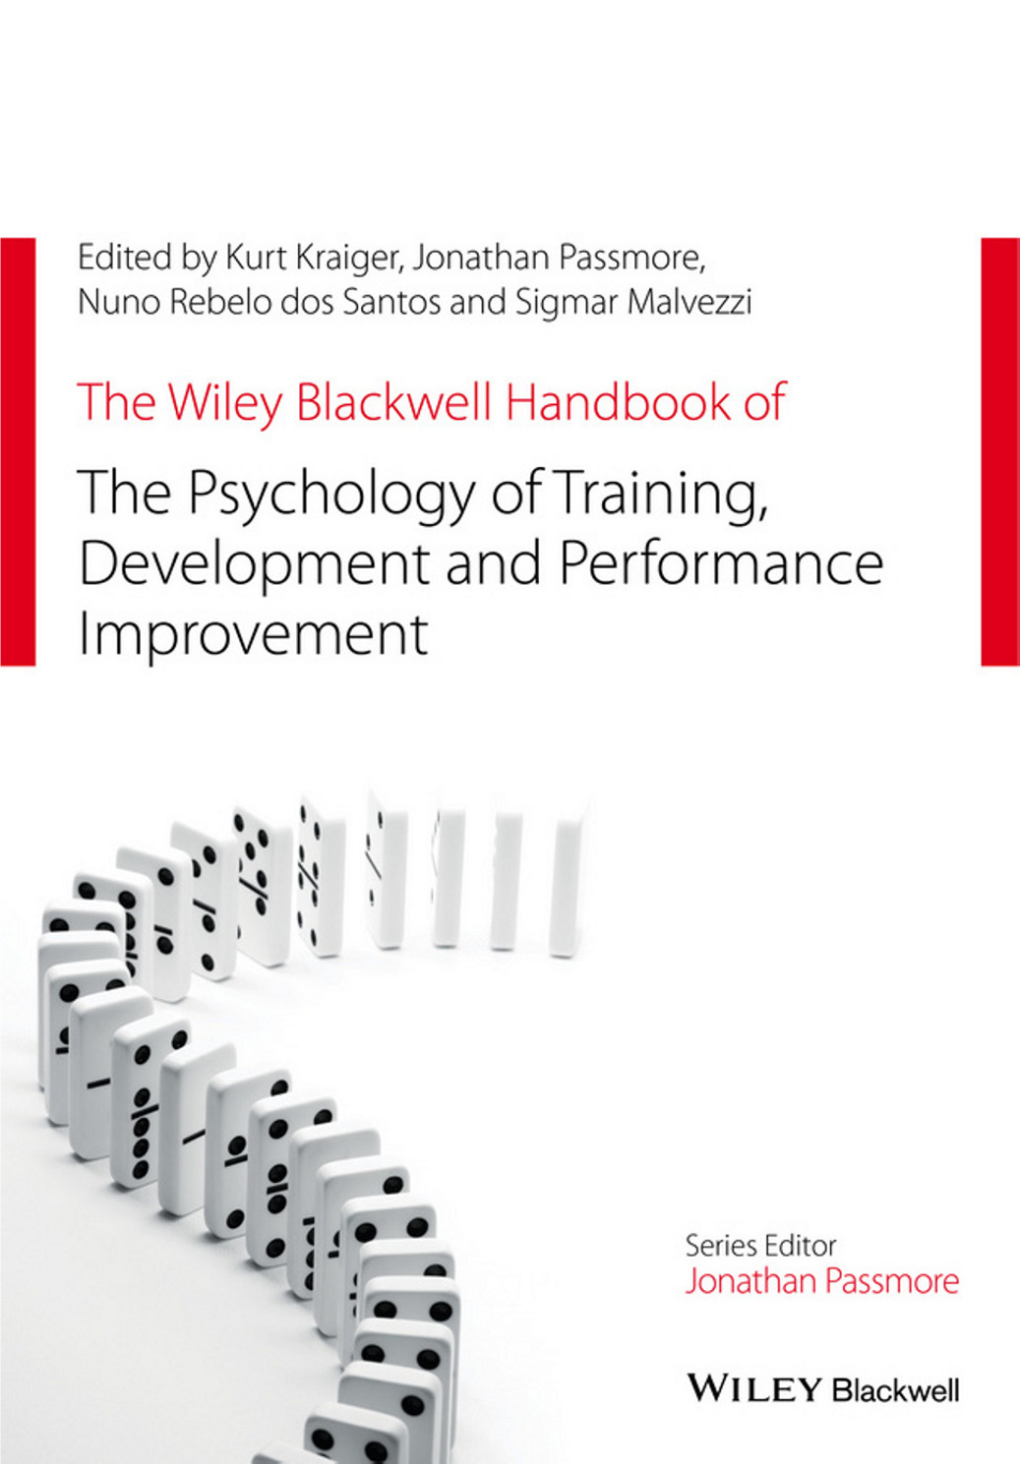 The Wiley Blackwell Handbook of the Psychology of Training